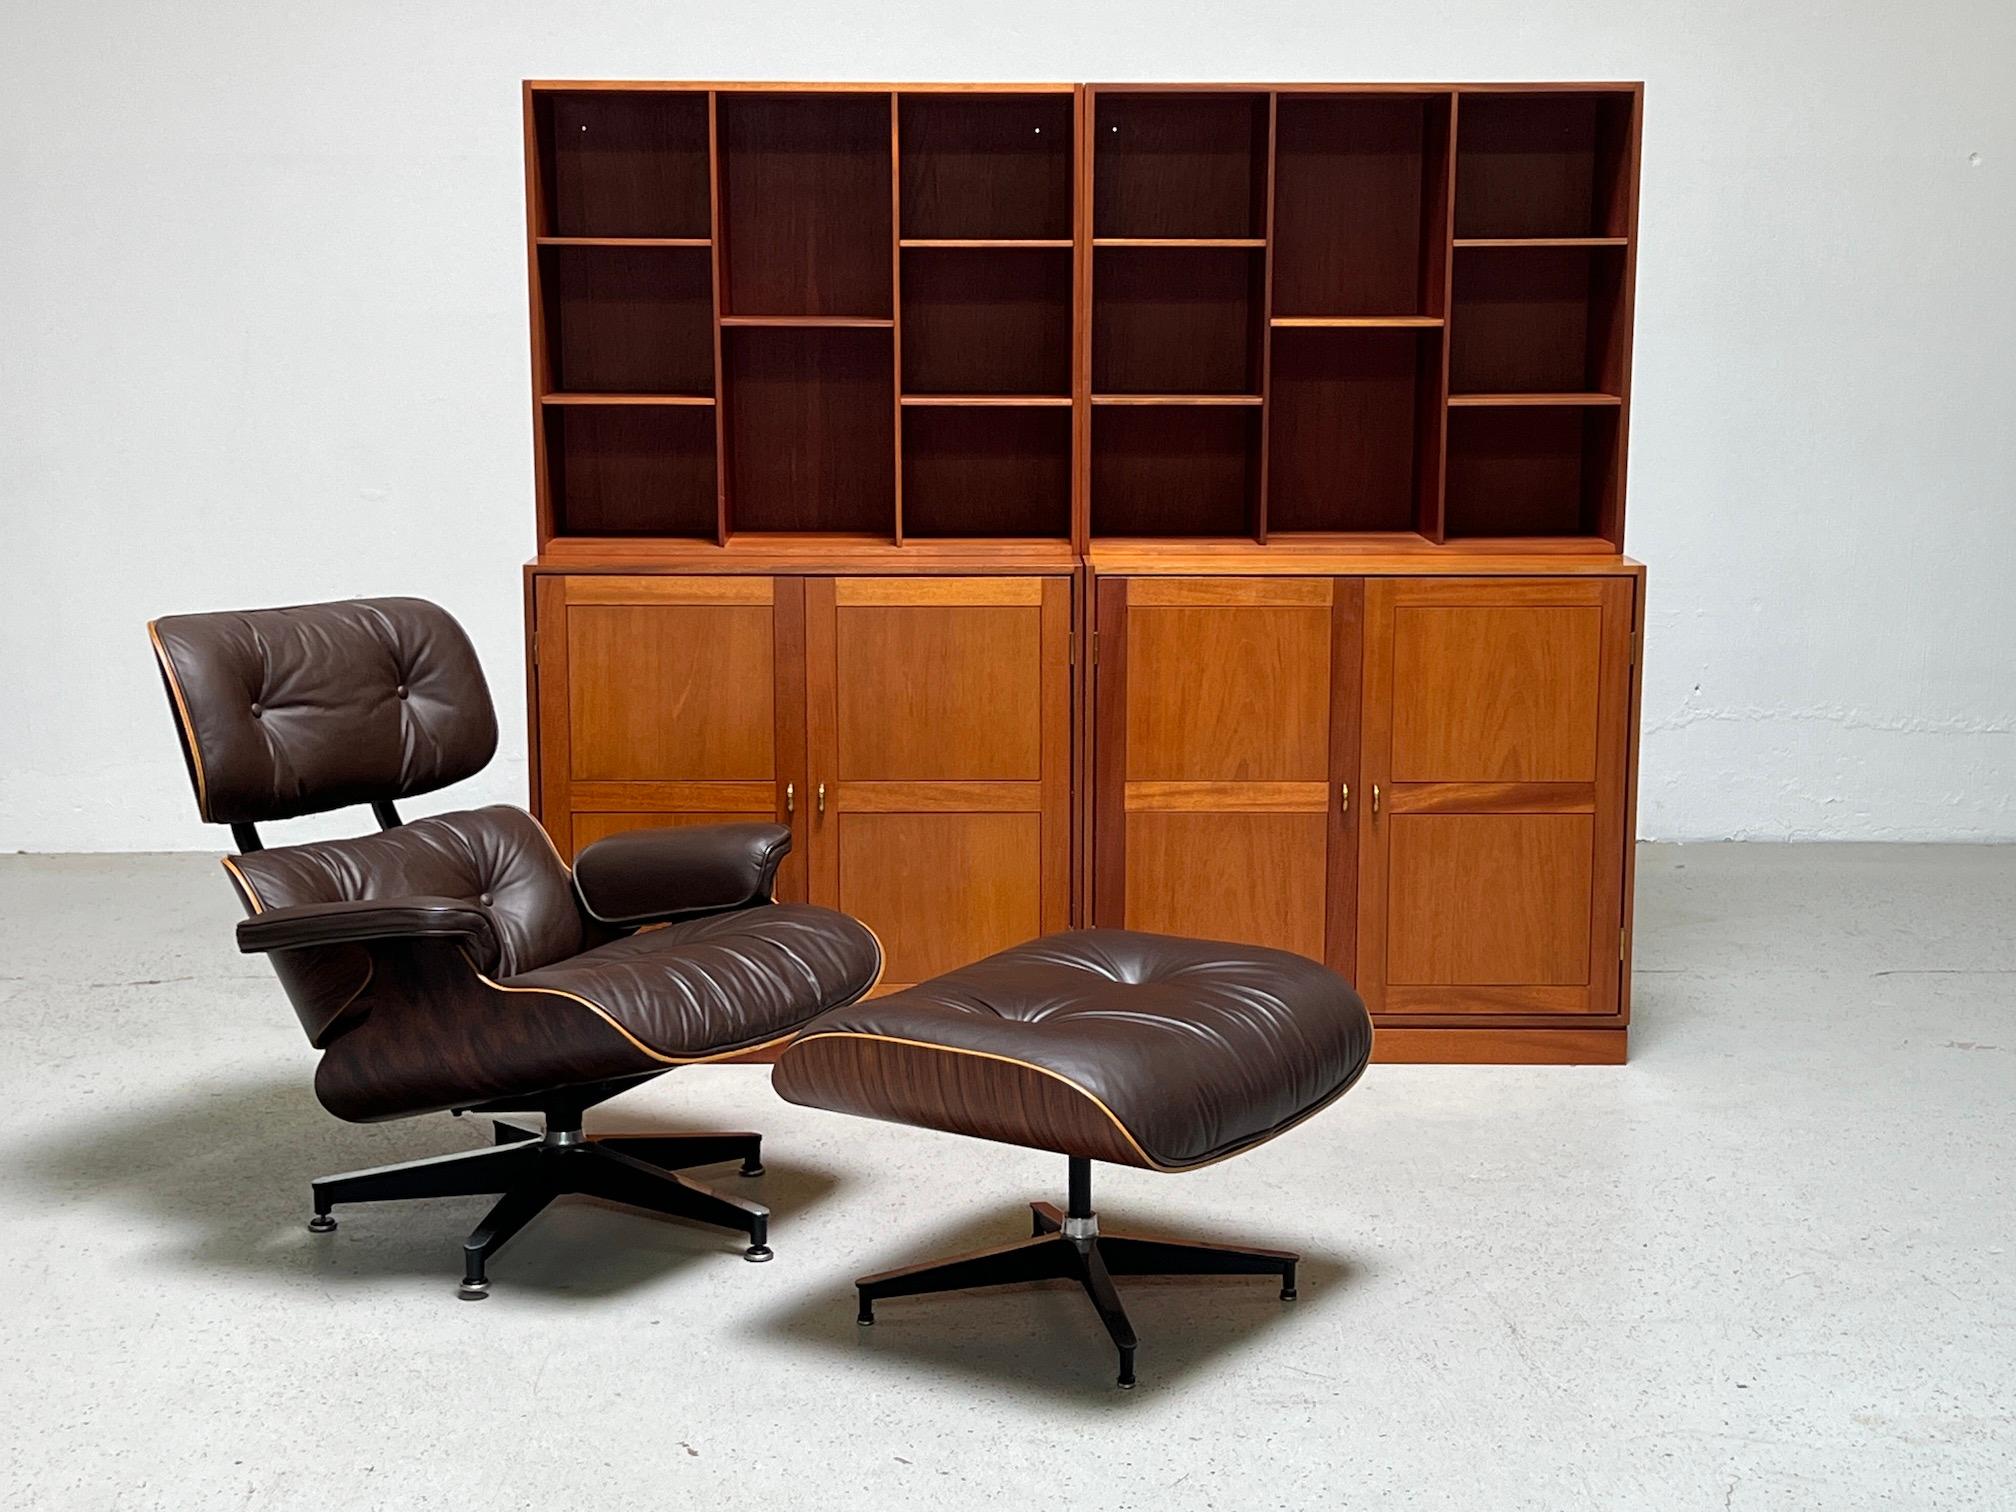 Nice example of a rosewood and dark brown leather 670 /671 lounge chair and ottoman by Charles Eames for Herman Miller. This particular chair is from the collection of T. Boone Pickens.